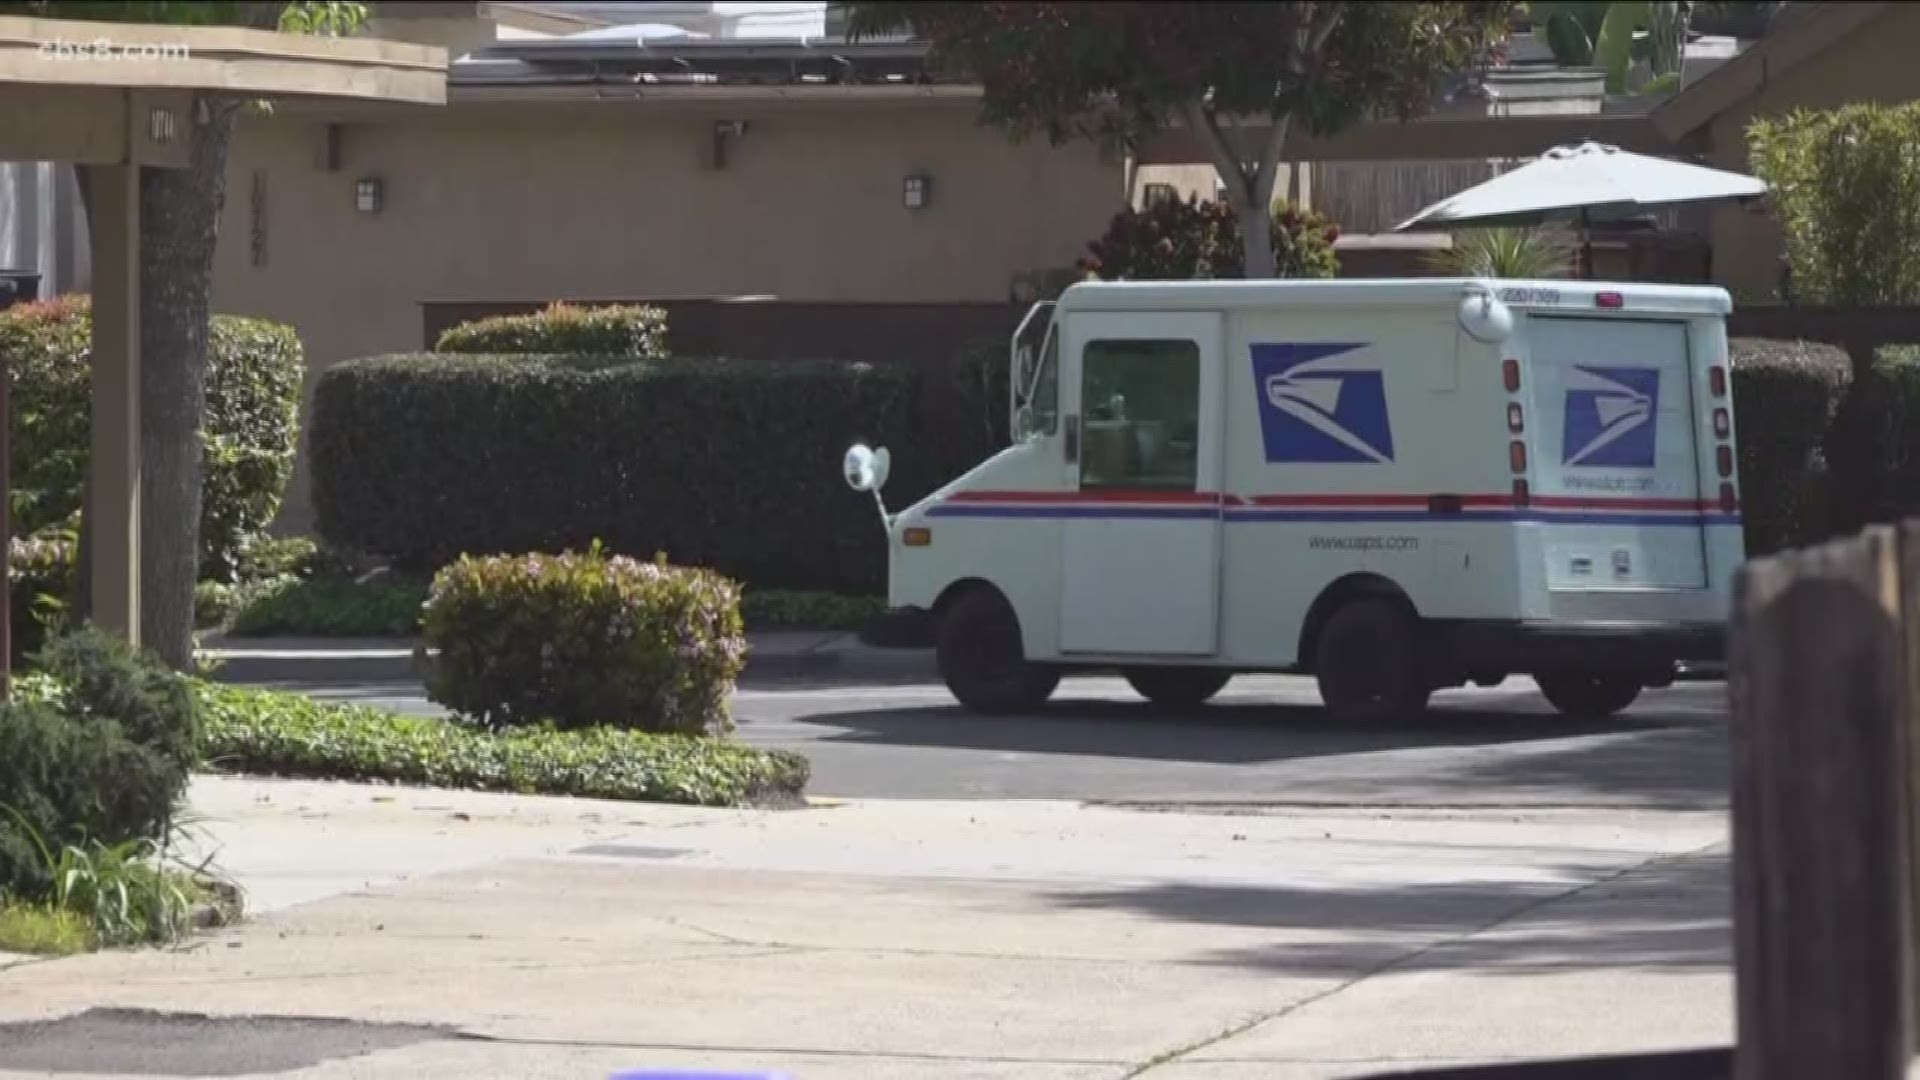 A San Diego letter carrier criticized the U.S. Postal Service’s handling of the coronavirus outbreak after a second employee tested positive for the illness.